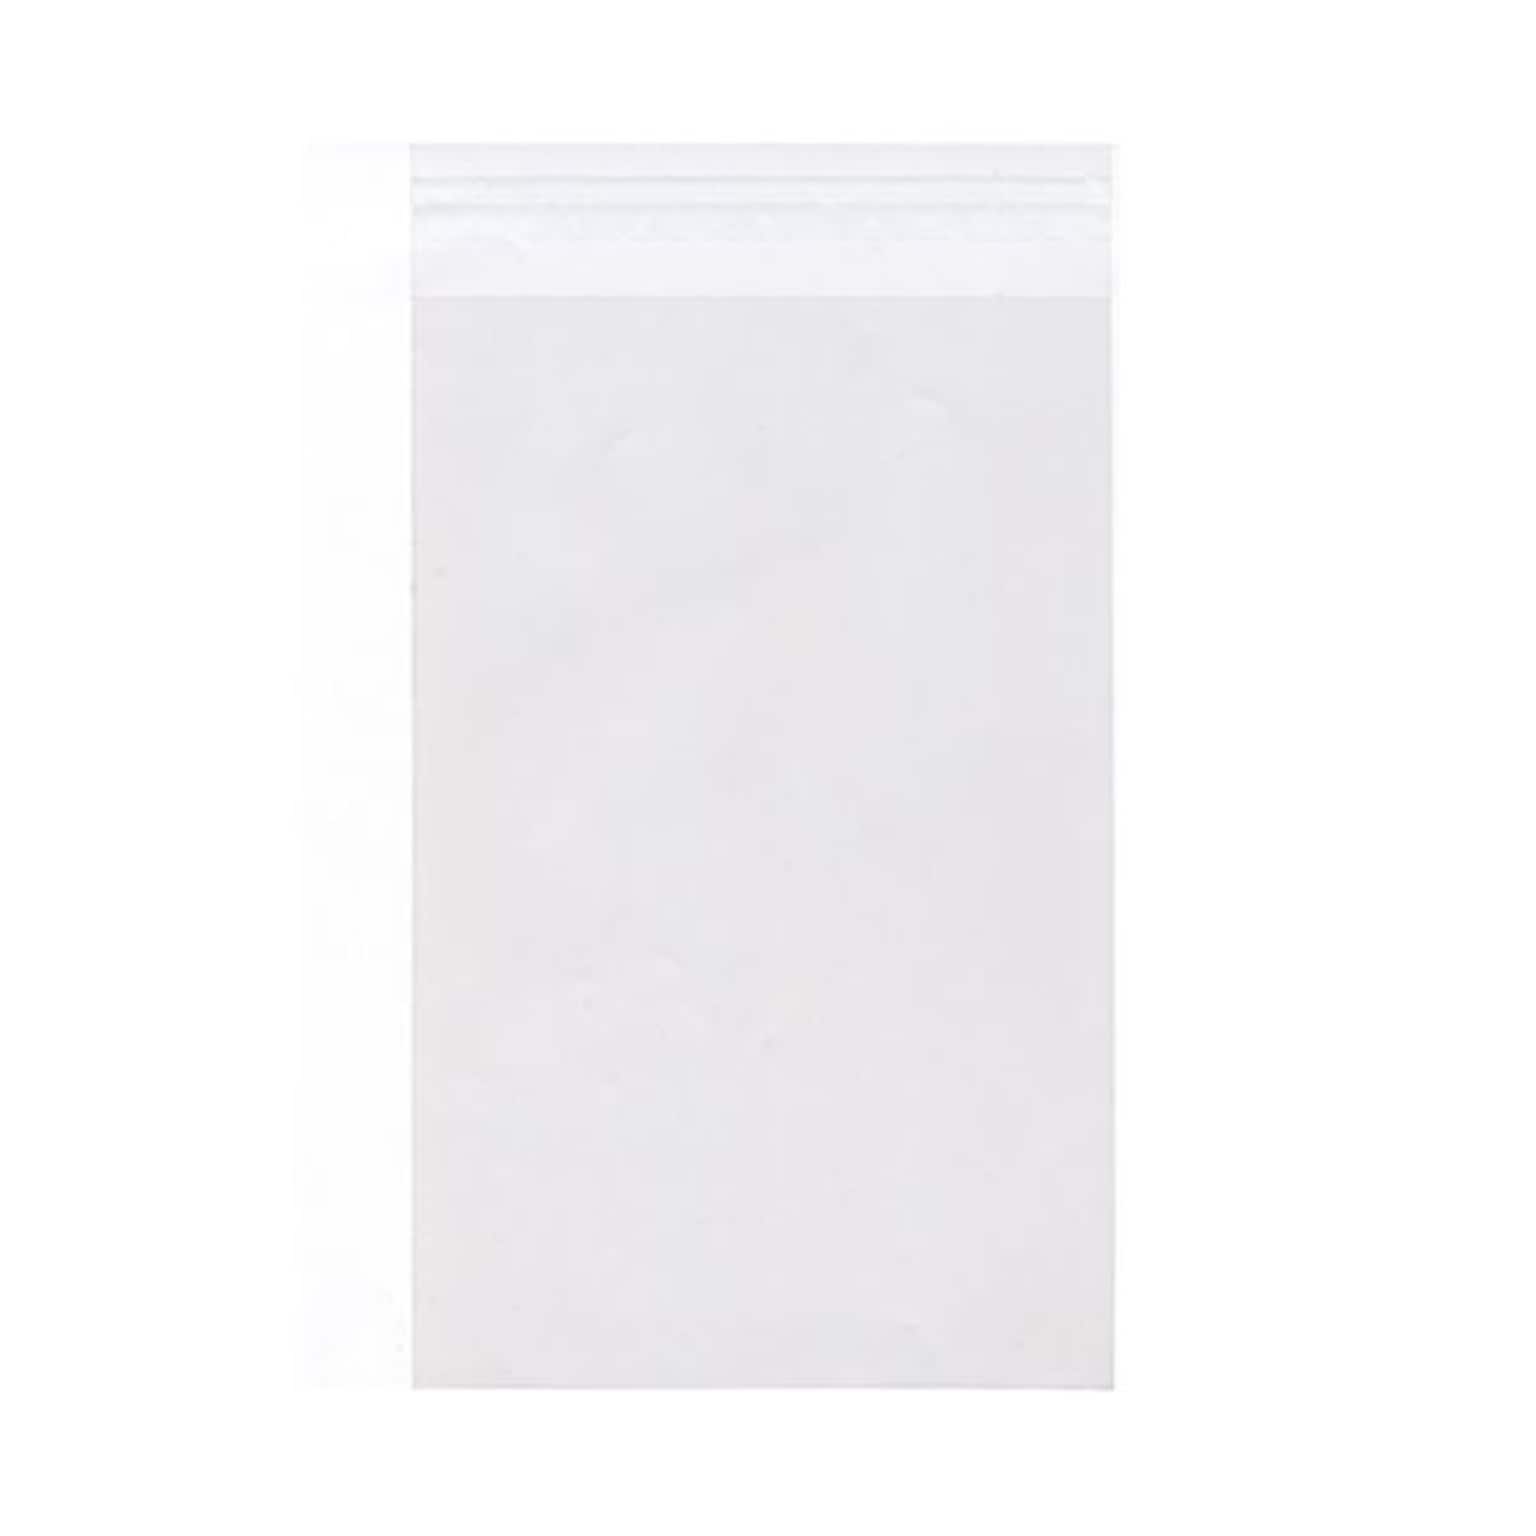 JAM Paper Cello Sleeves with Peel & Seal Closure, 12.4375 x 18.25, Clear, 100/Pack (12.5X18.25CELLO)